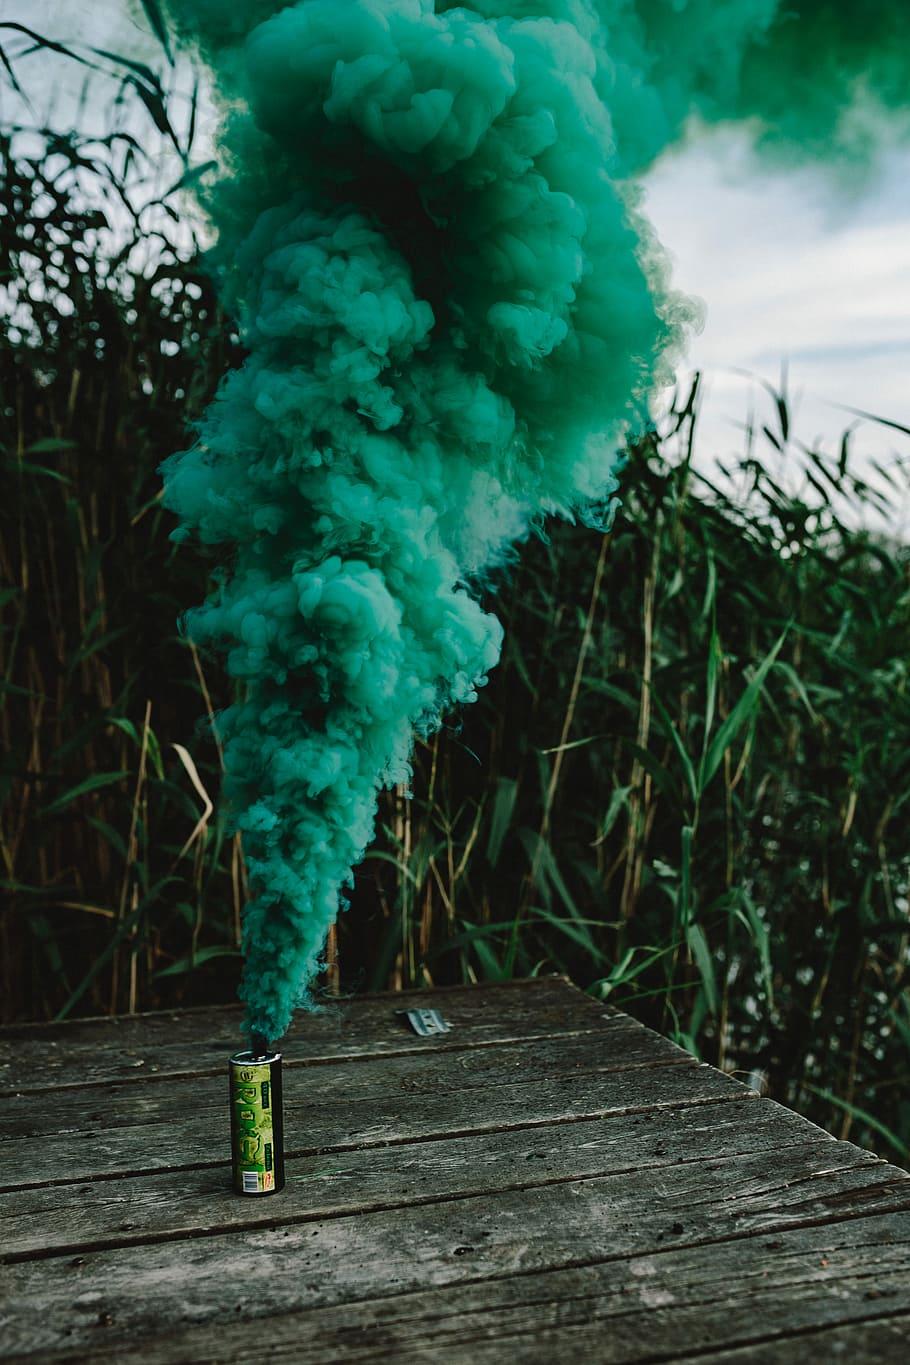 HD wallpaper: Green smoke bomb, abstract, background, outdoor